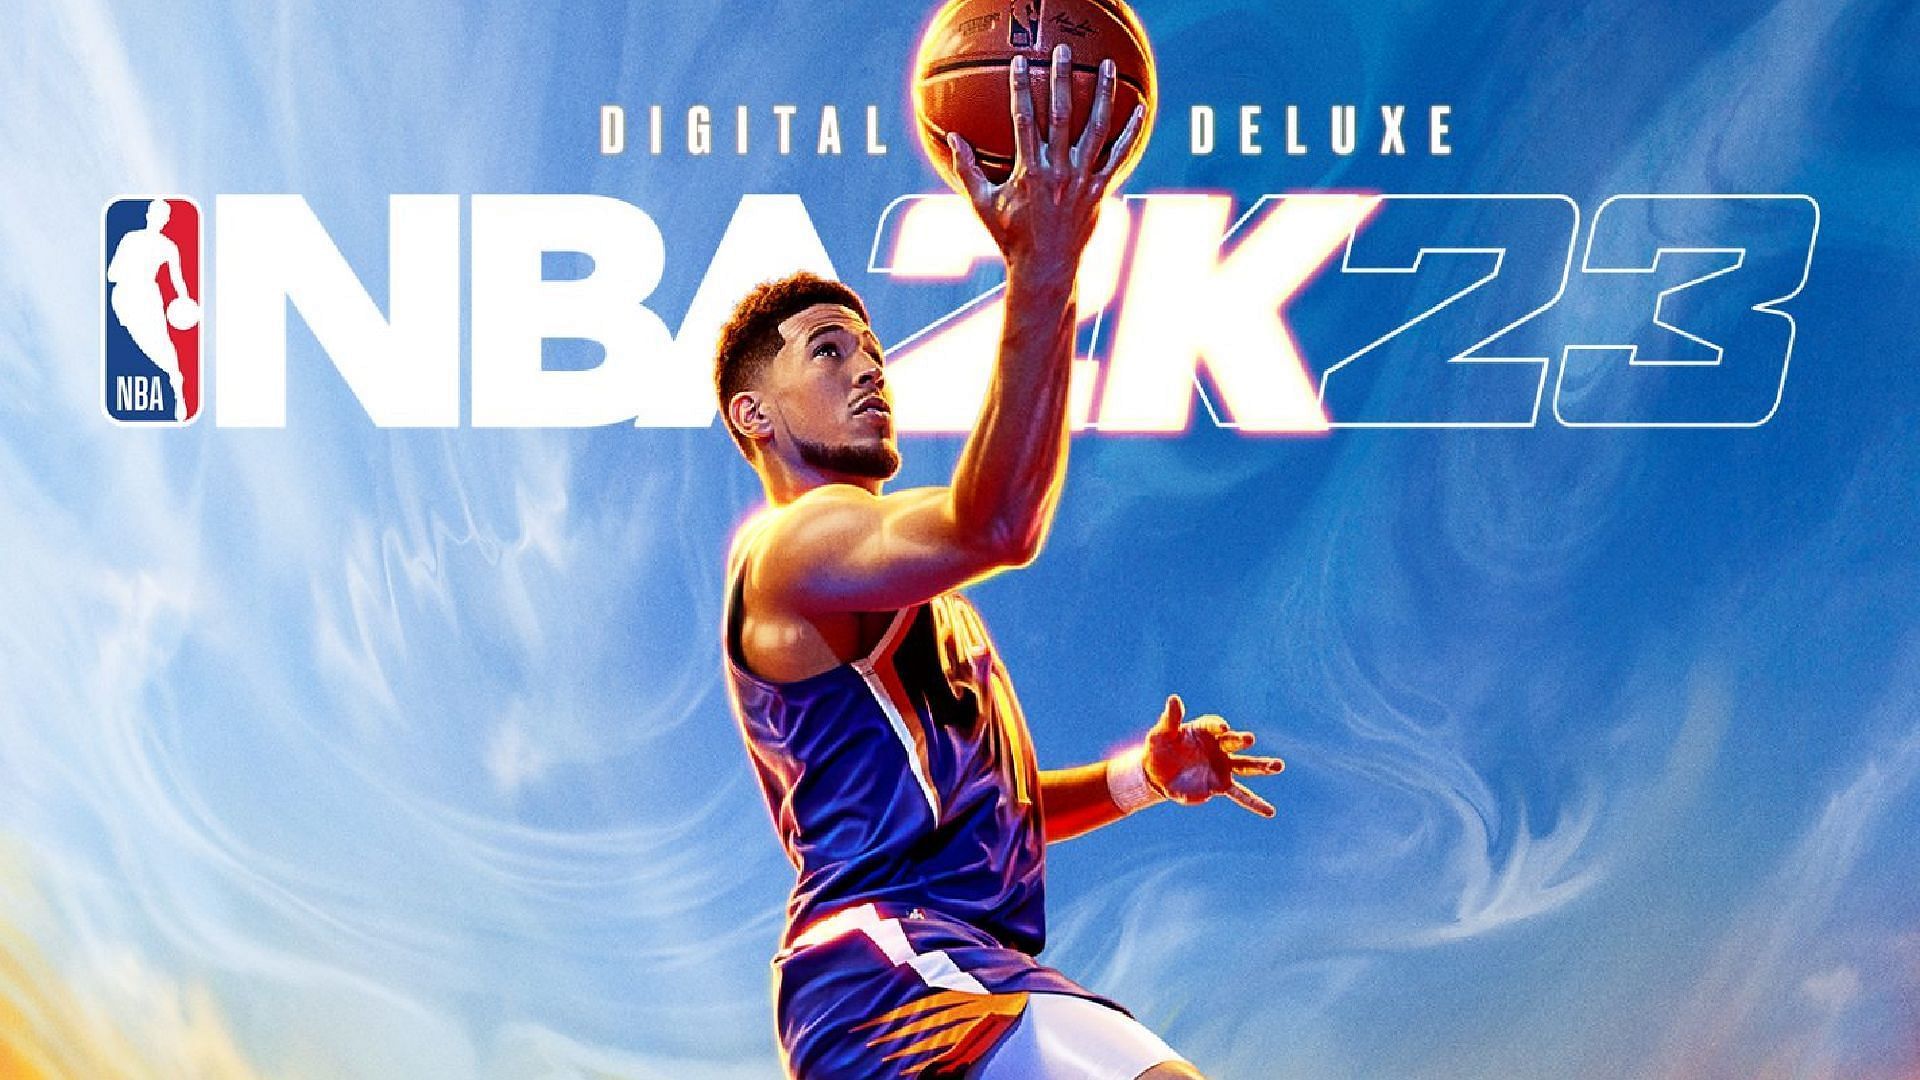 NBA 2K23: Deluxe Edition cover